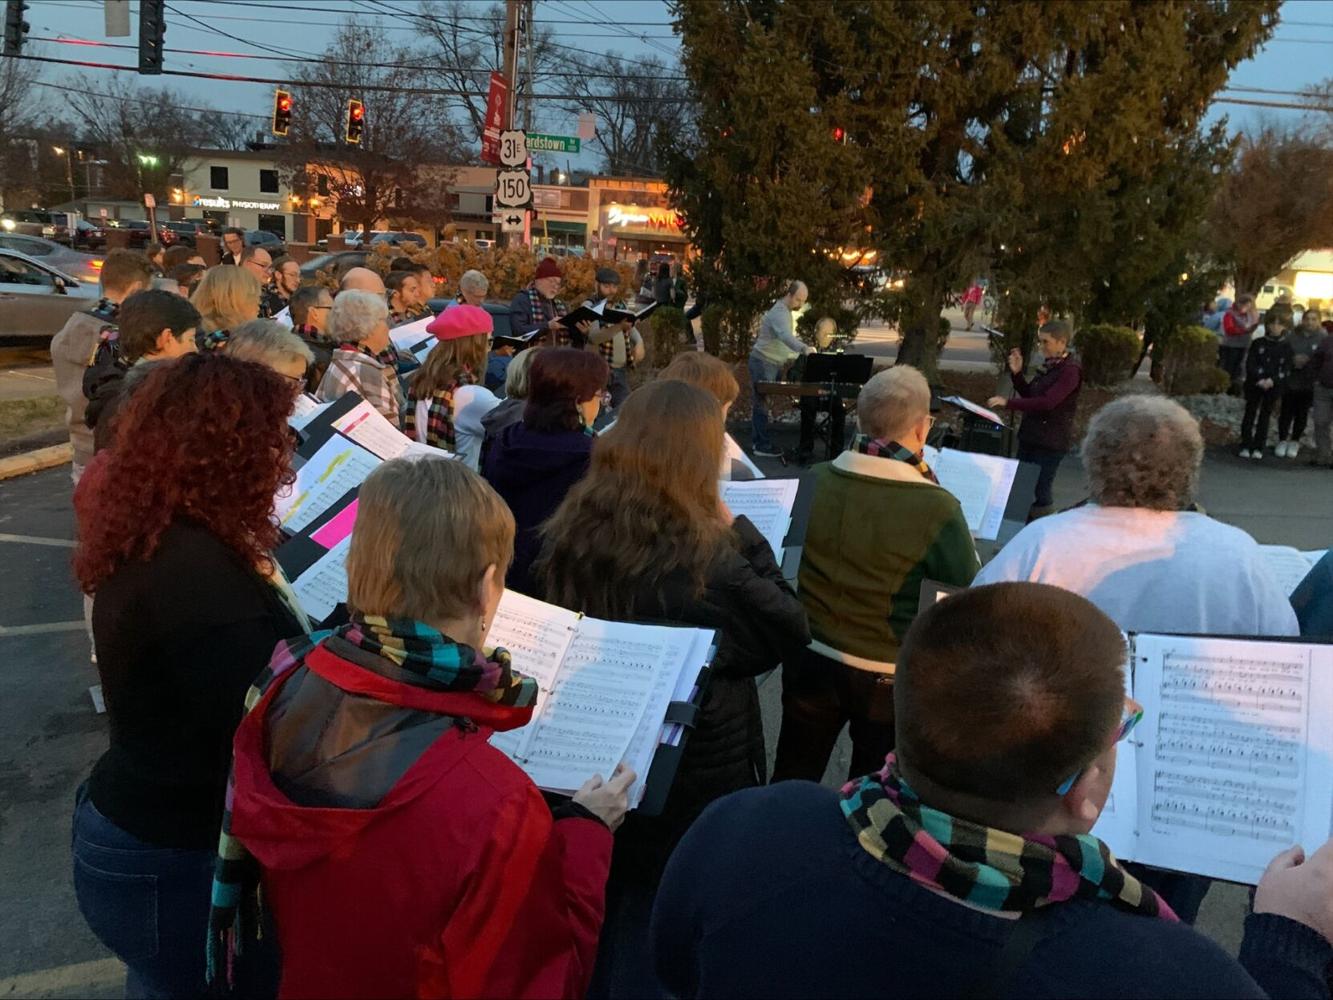 Thousands attend the annual Bardstown Road Aglow News